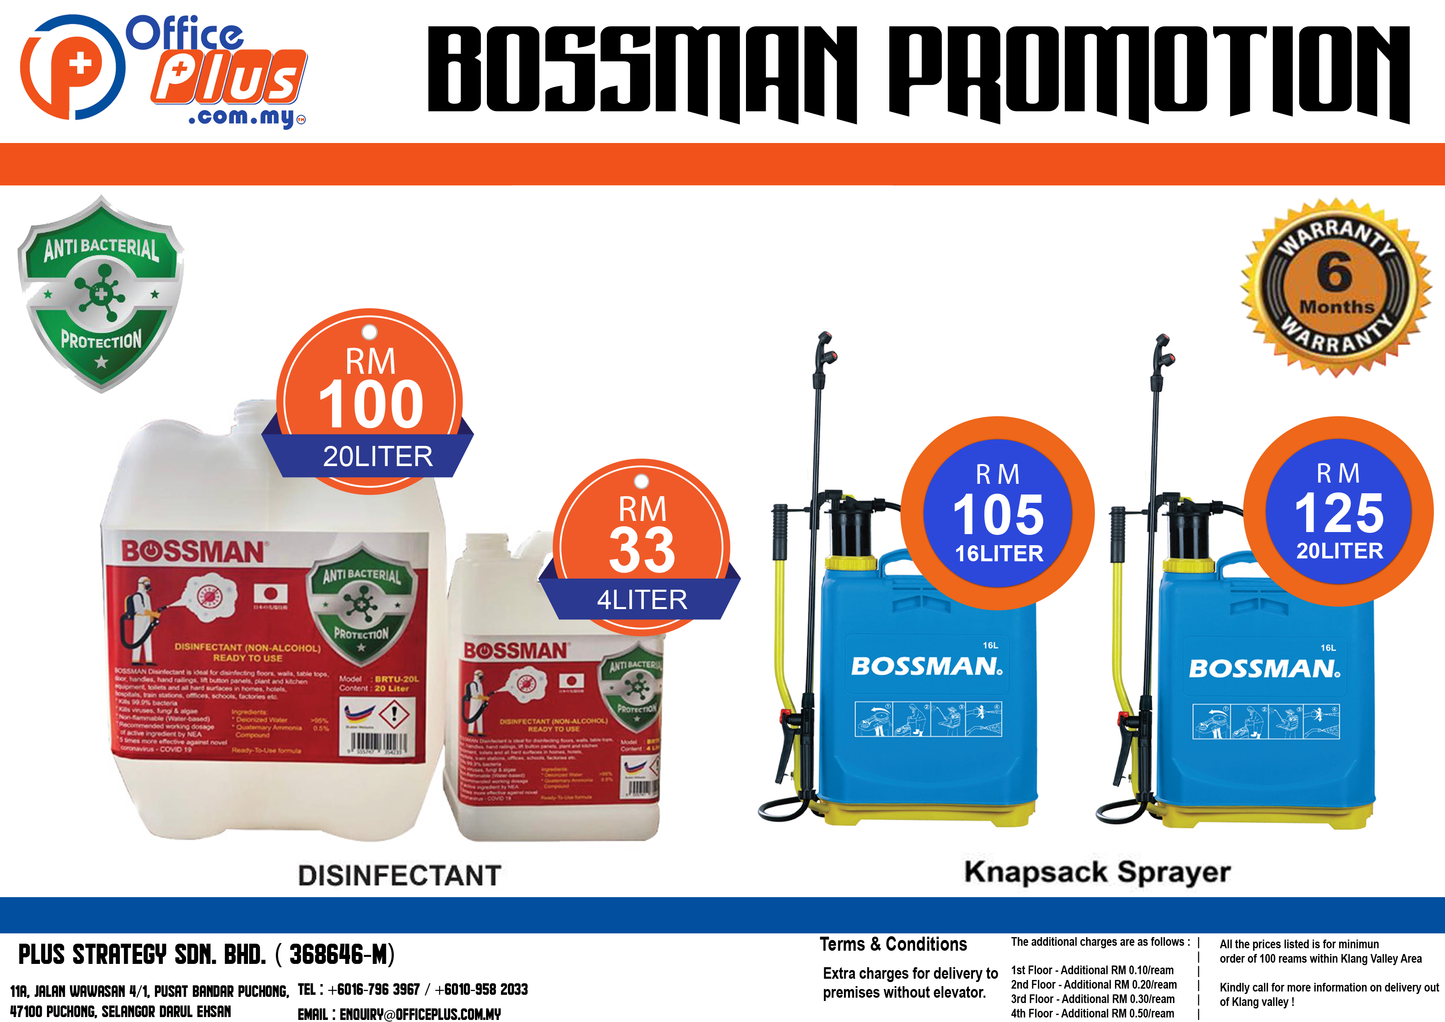 Bossman Disinfectant (Non-Alcohol) - Ready To Use - OfficePlus